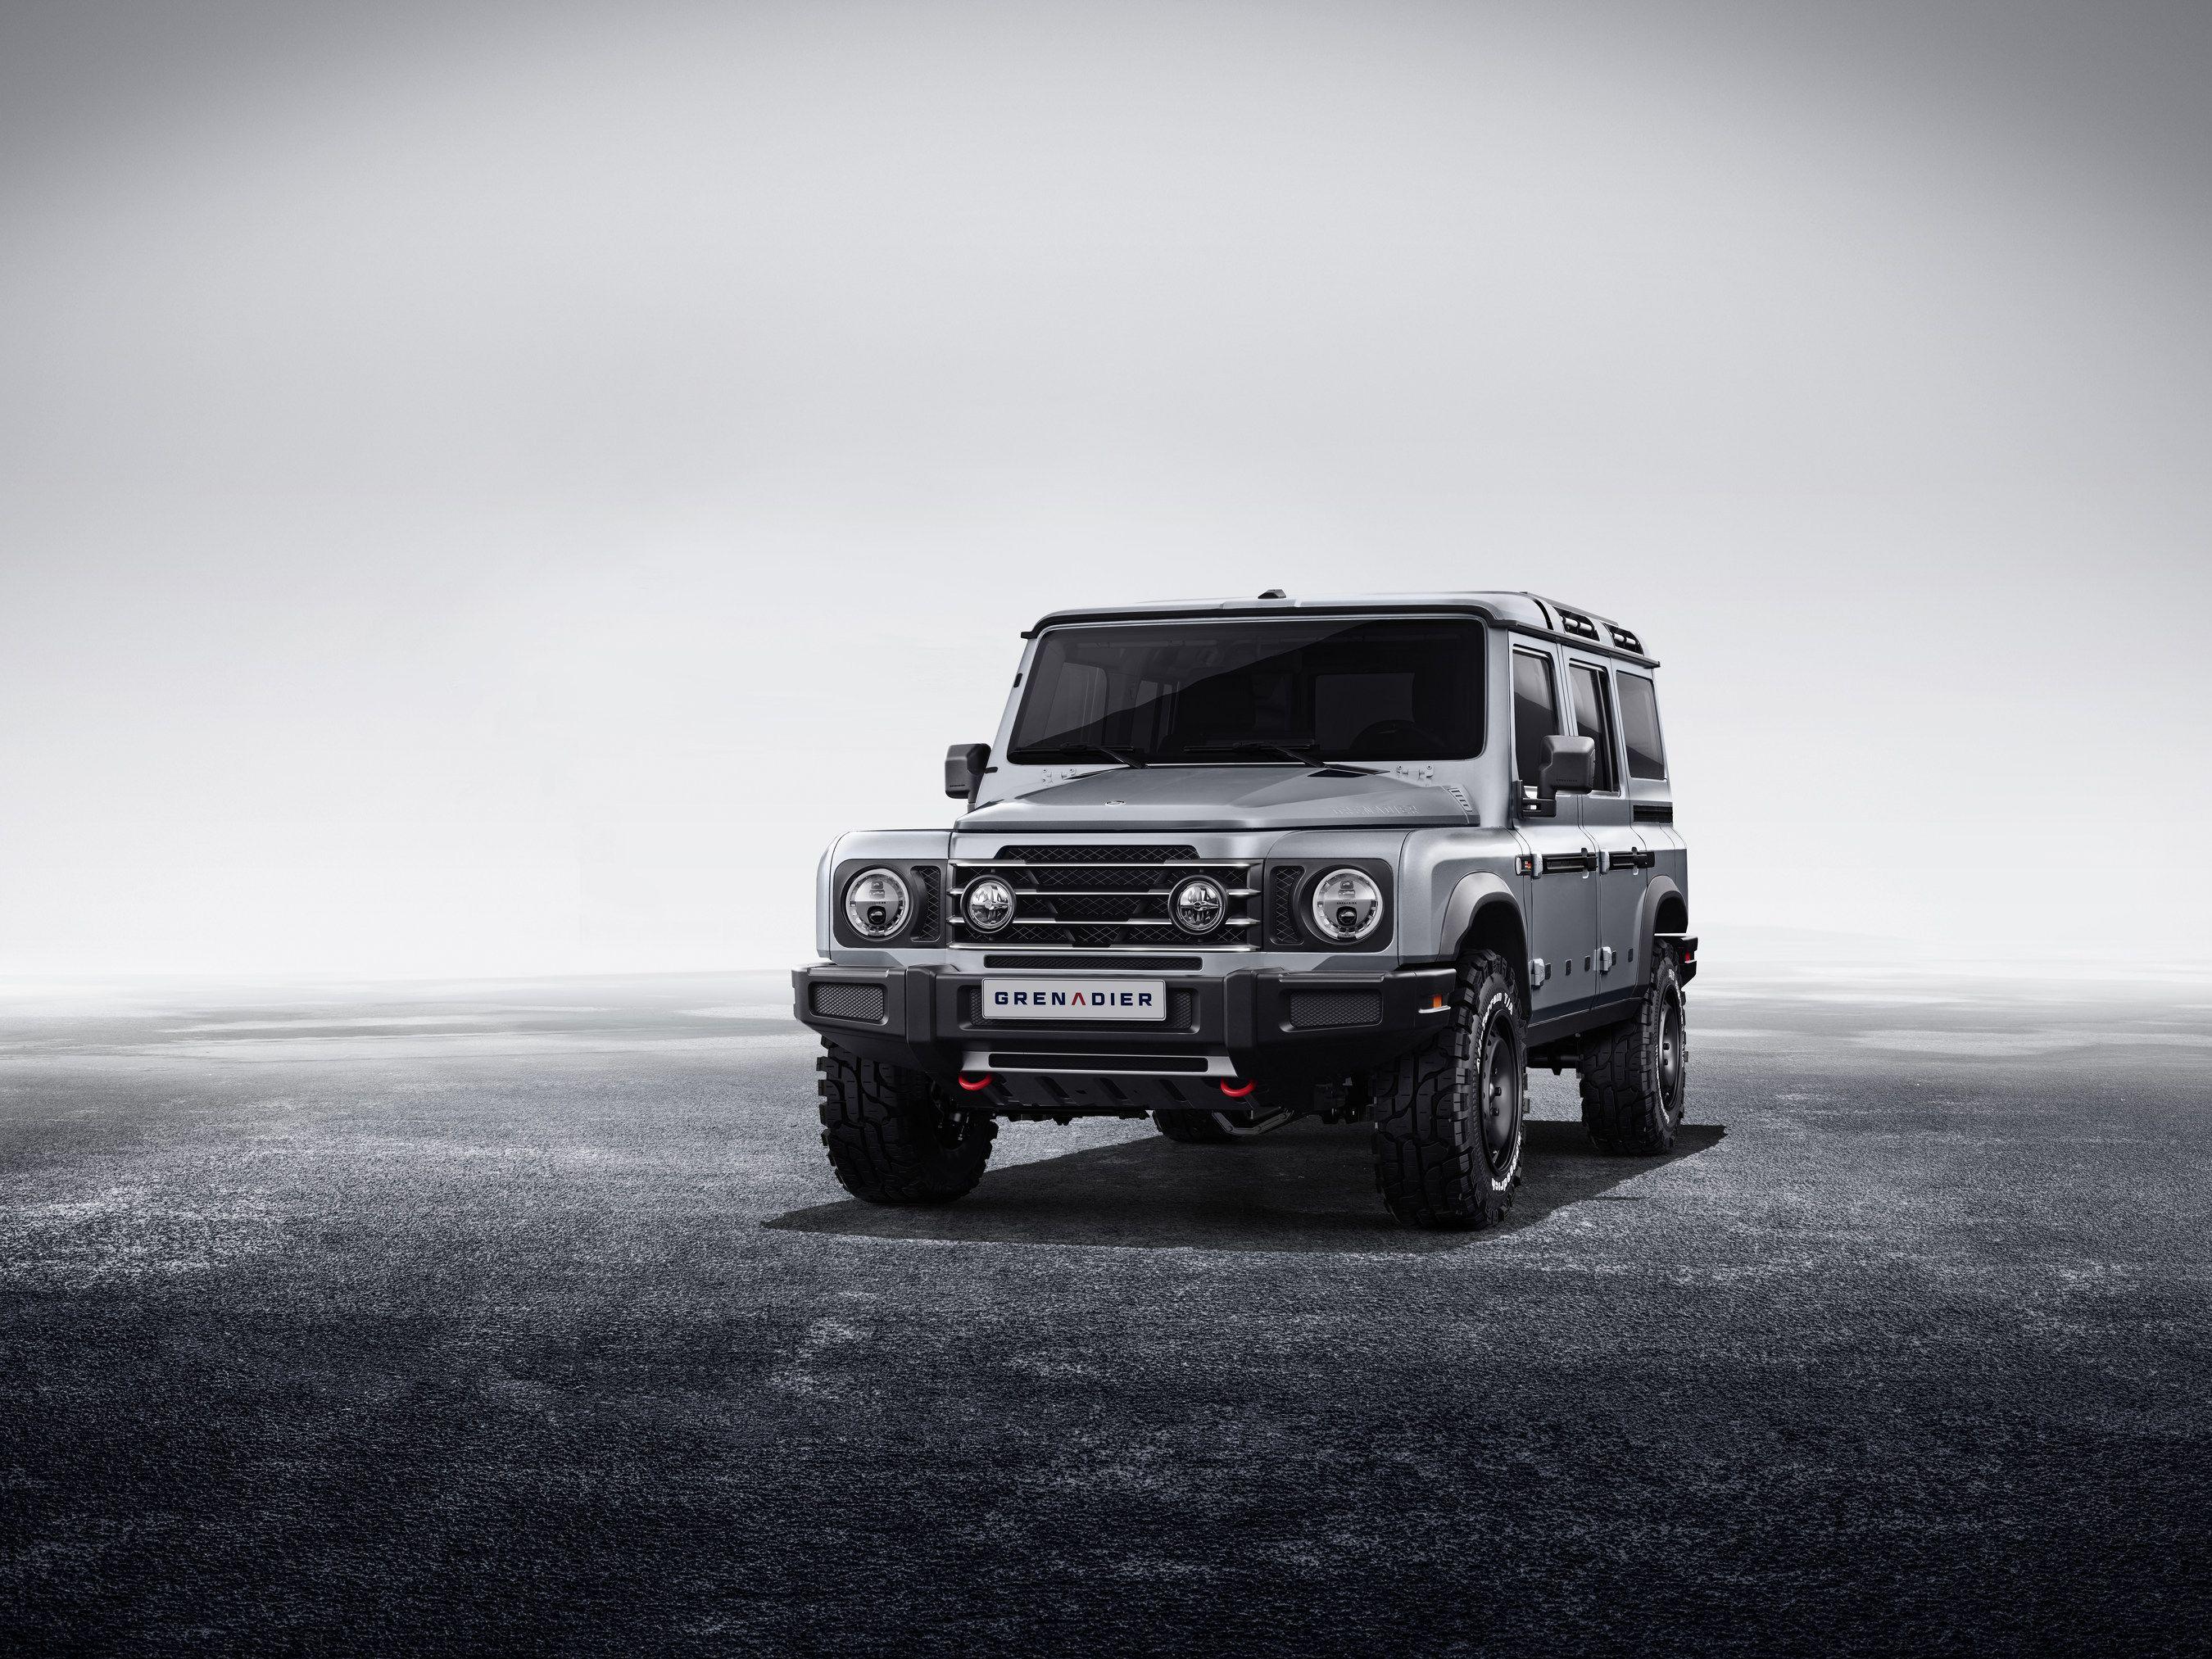 Ineos Grenadier Looks A Lot Like The Old Land Rover Defender And